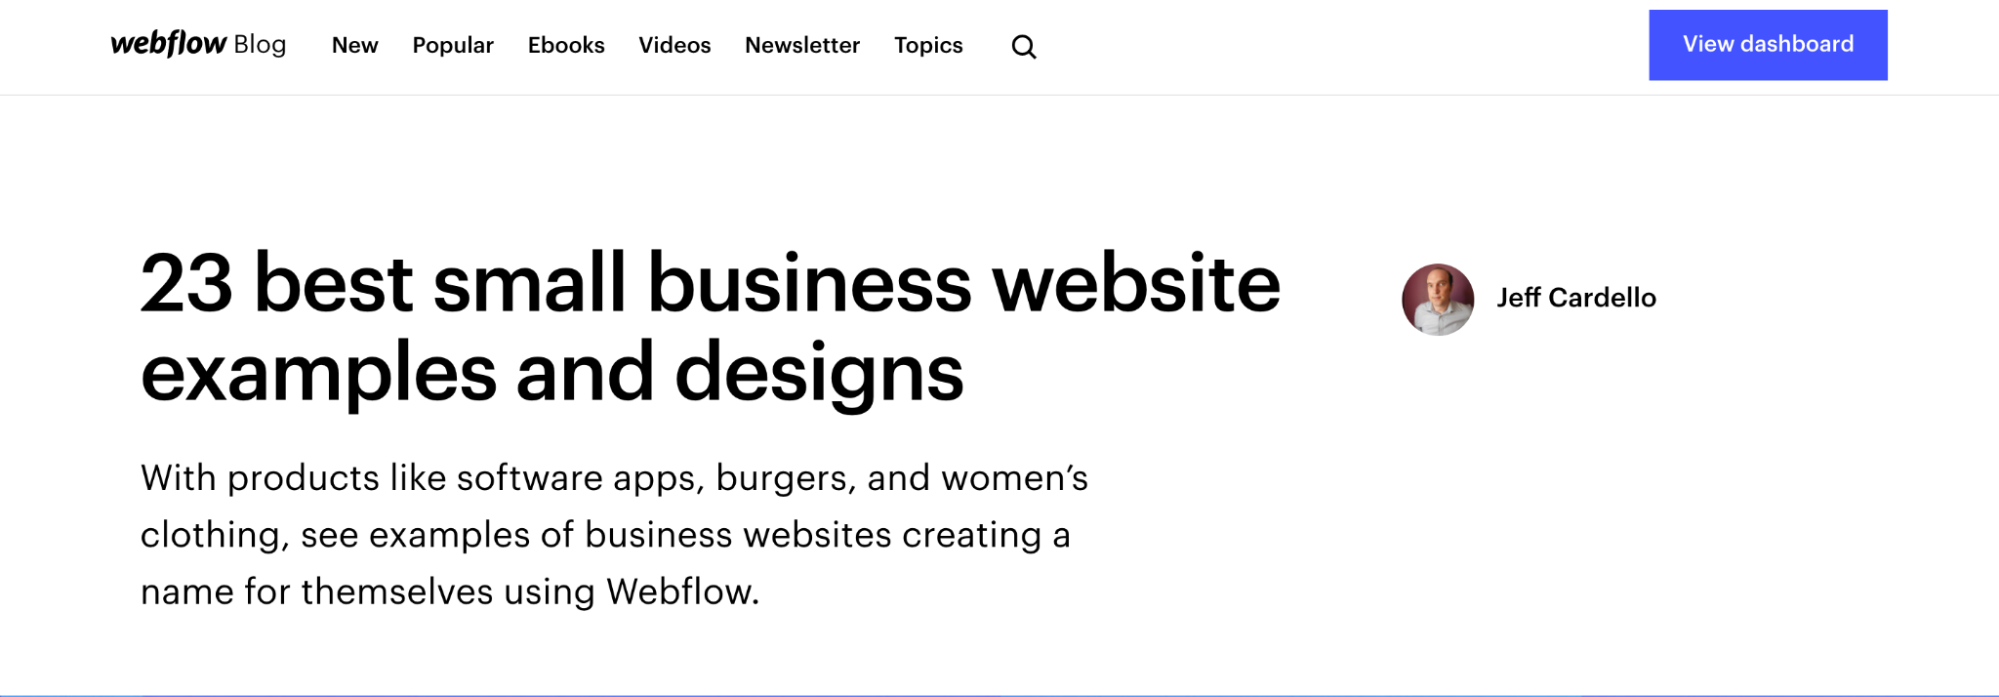 webflow blog post for "23 best small business website examples and designs"